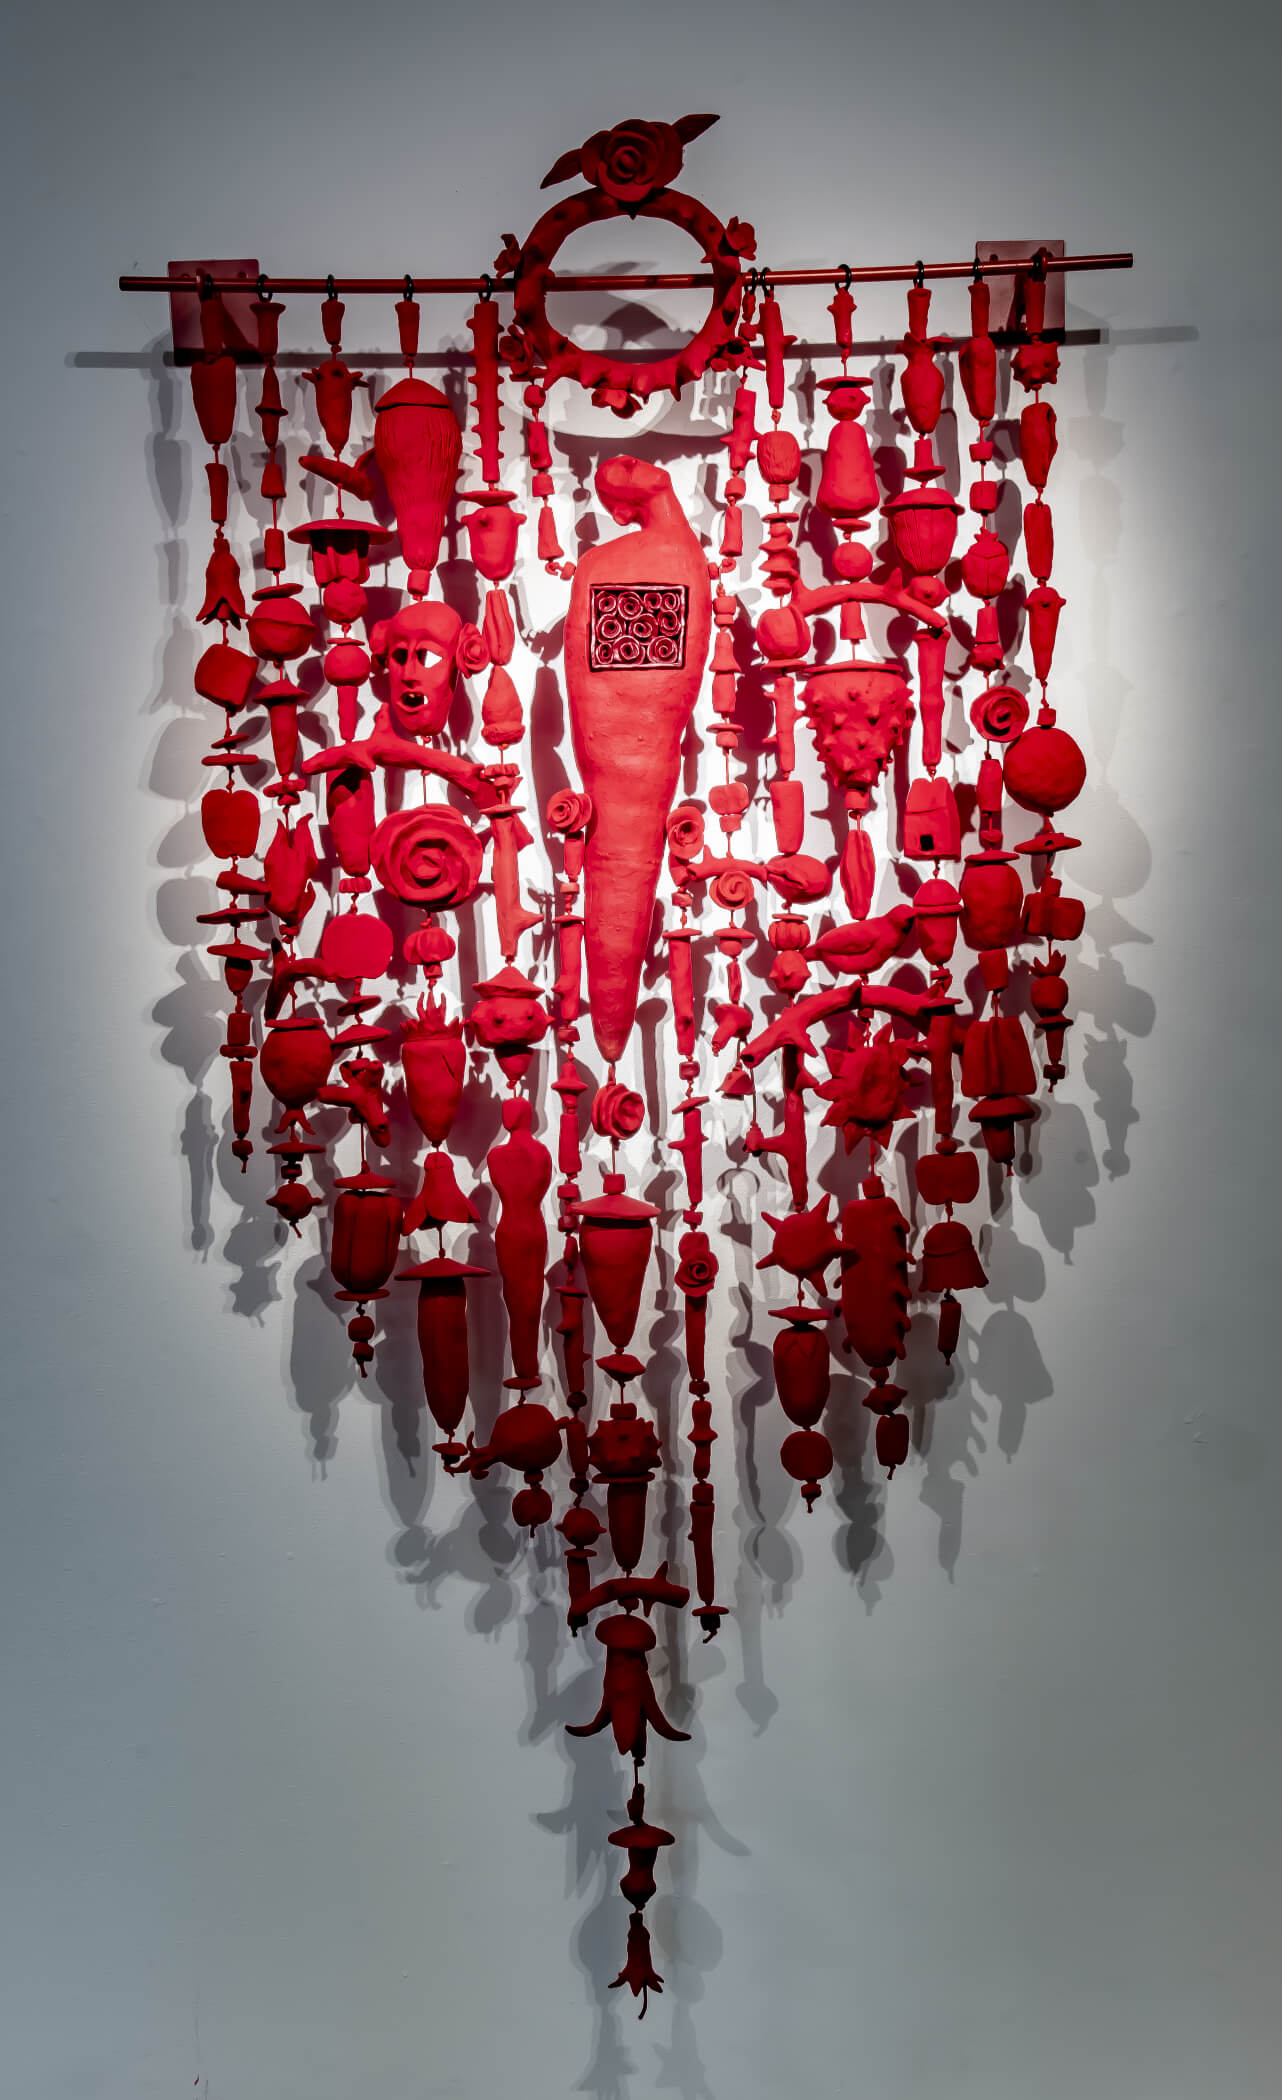 The Amulet Series 16 is a 48” x 57” low fired clay vertical wall hanging in red with figures of a human avatar, a face, thorny branches, geometric shapes, seed pods, birds, flames, flowers, and leaves.